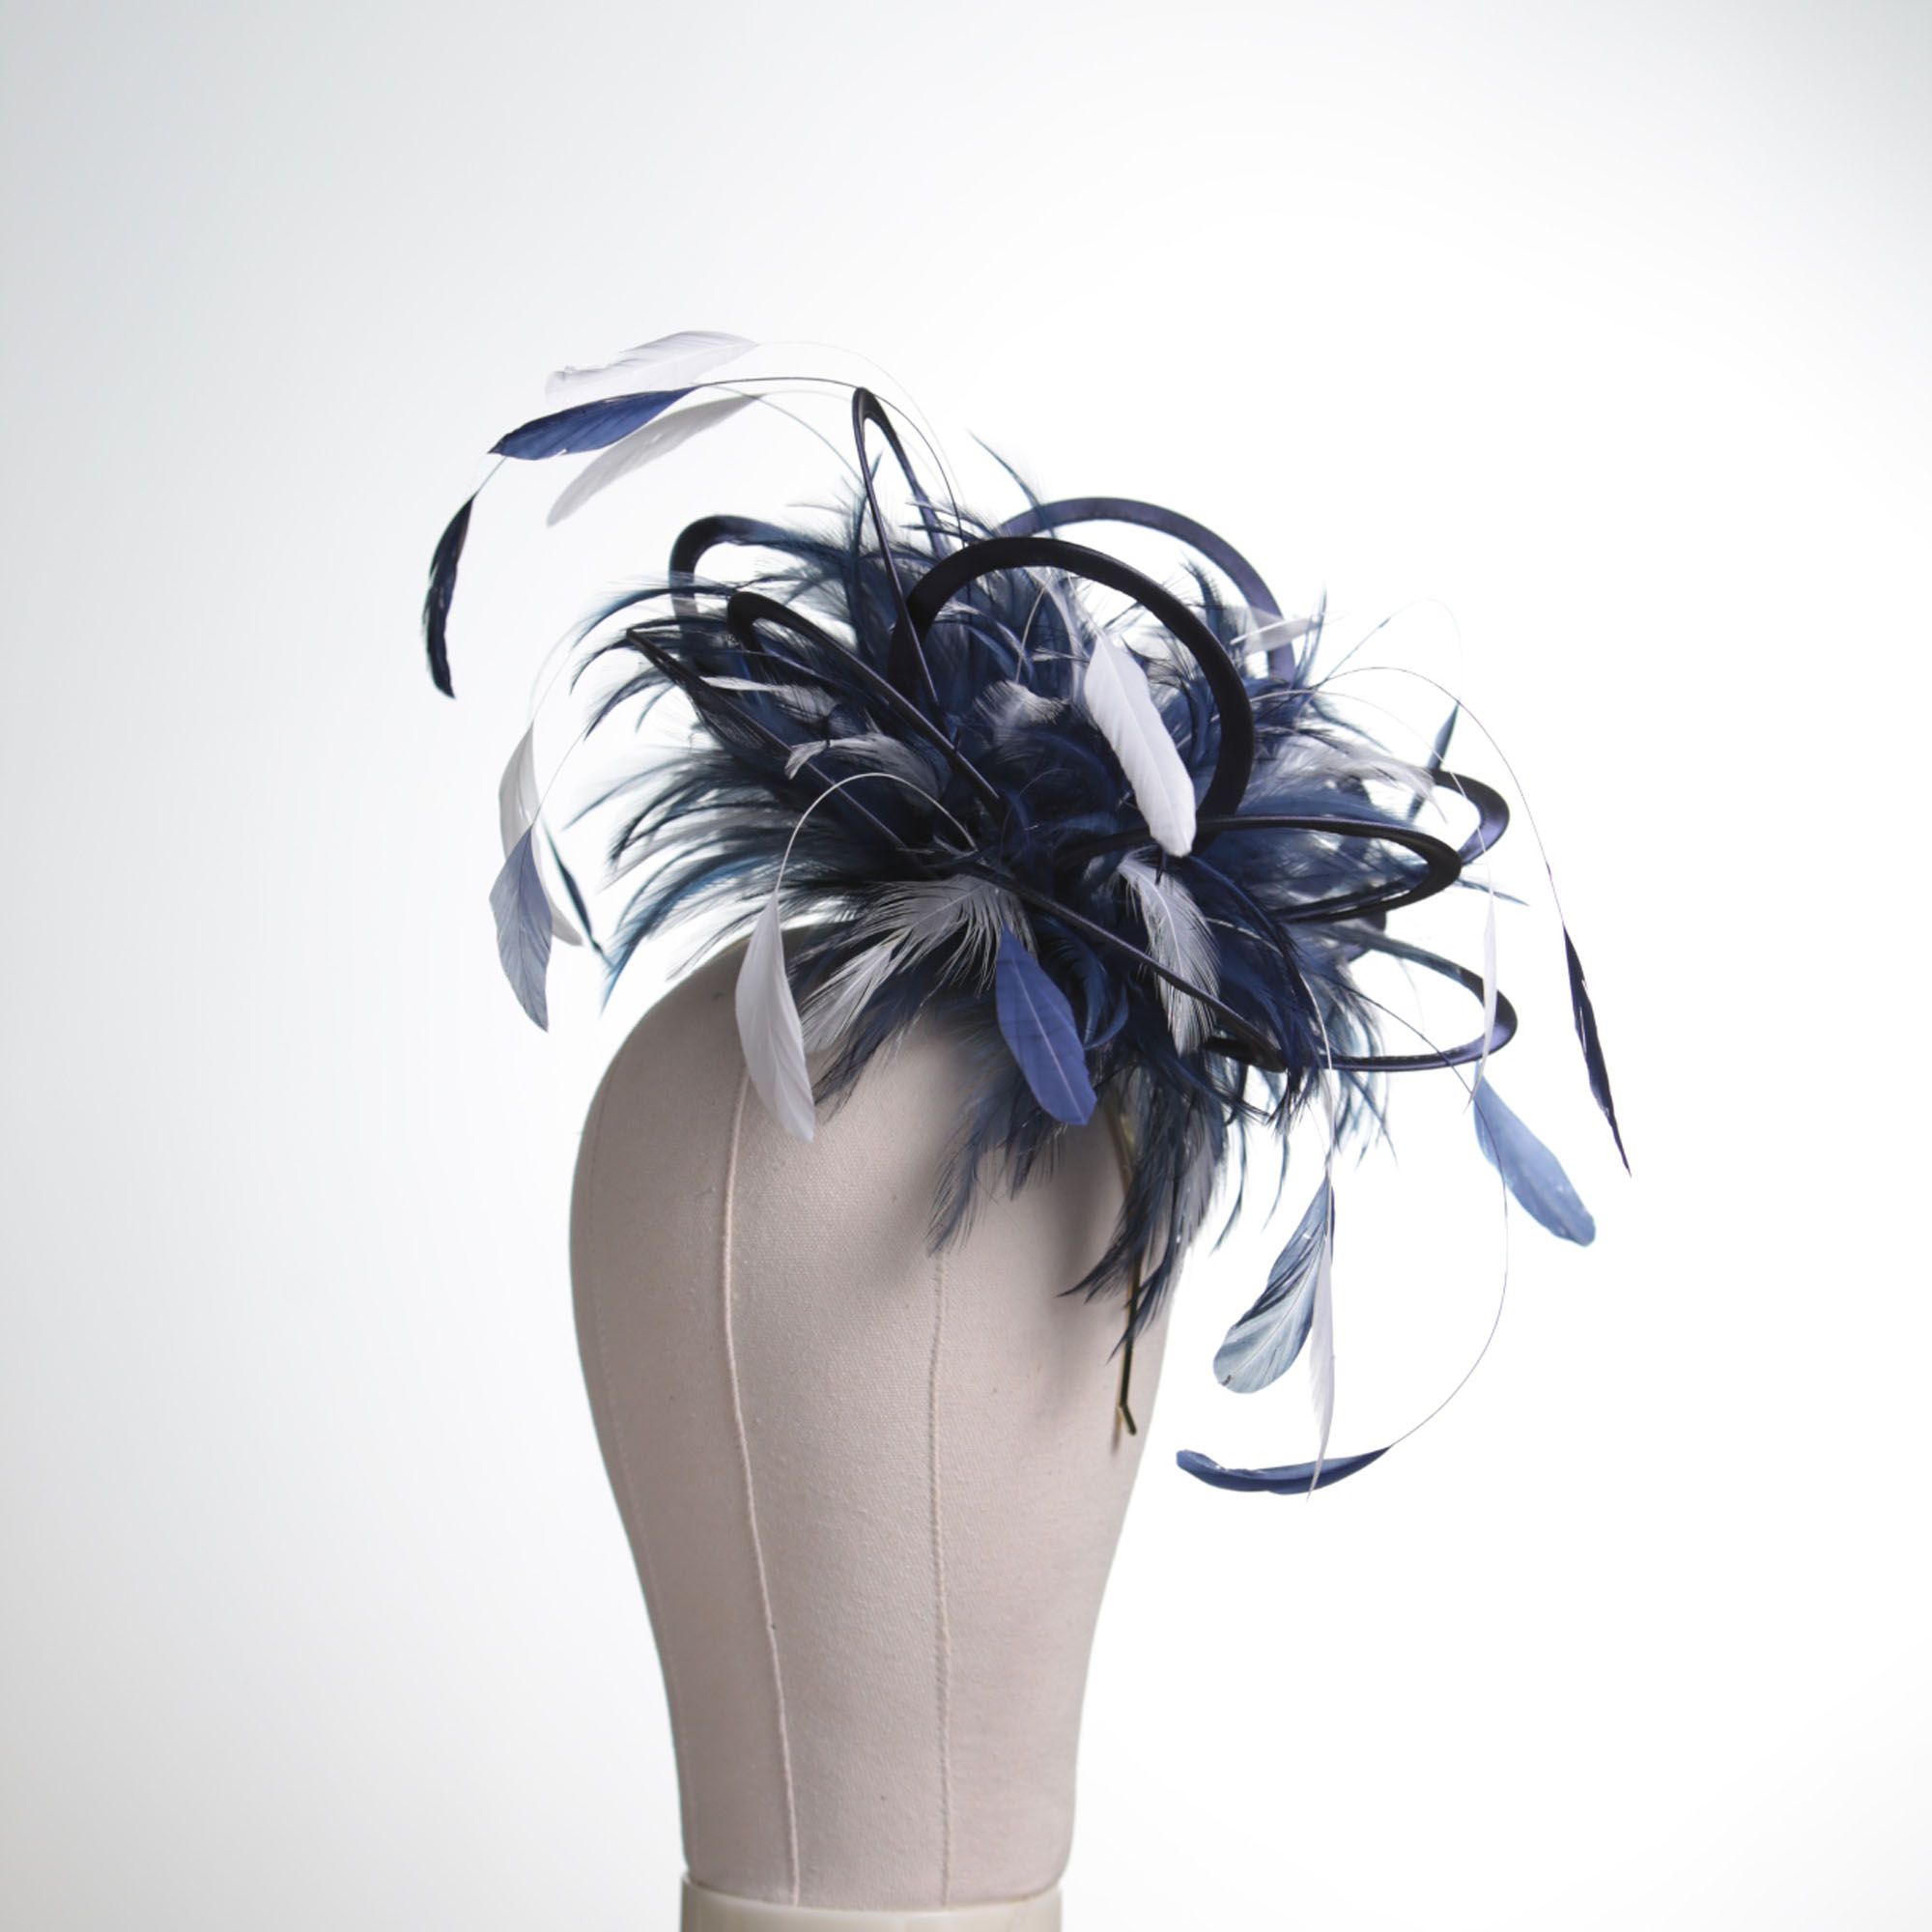 Ladies formal Navy Blue and White medium feather and satin loop fascinator hat. Suitable for a wedding or ladies day at the races